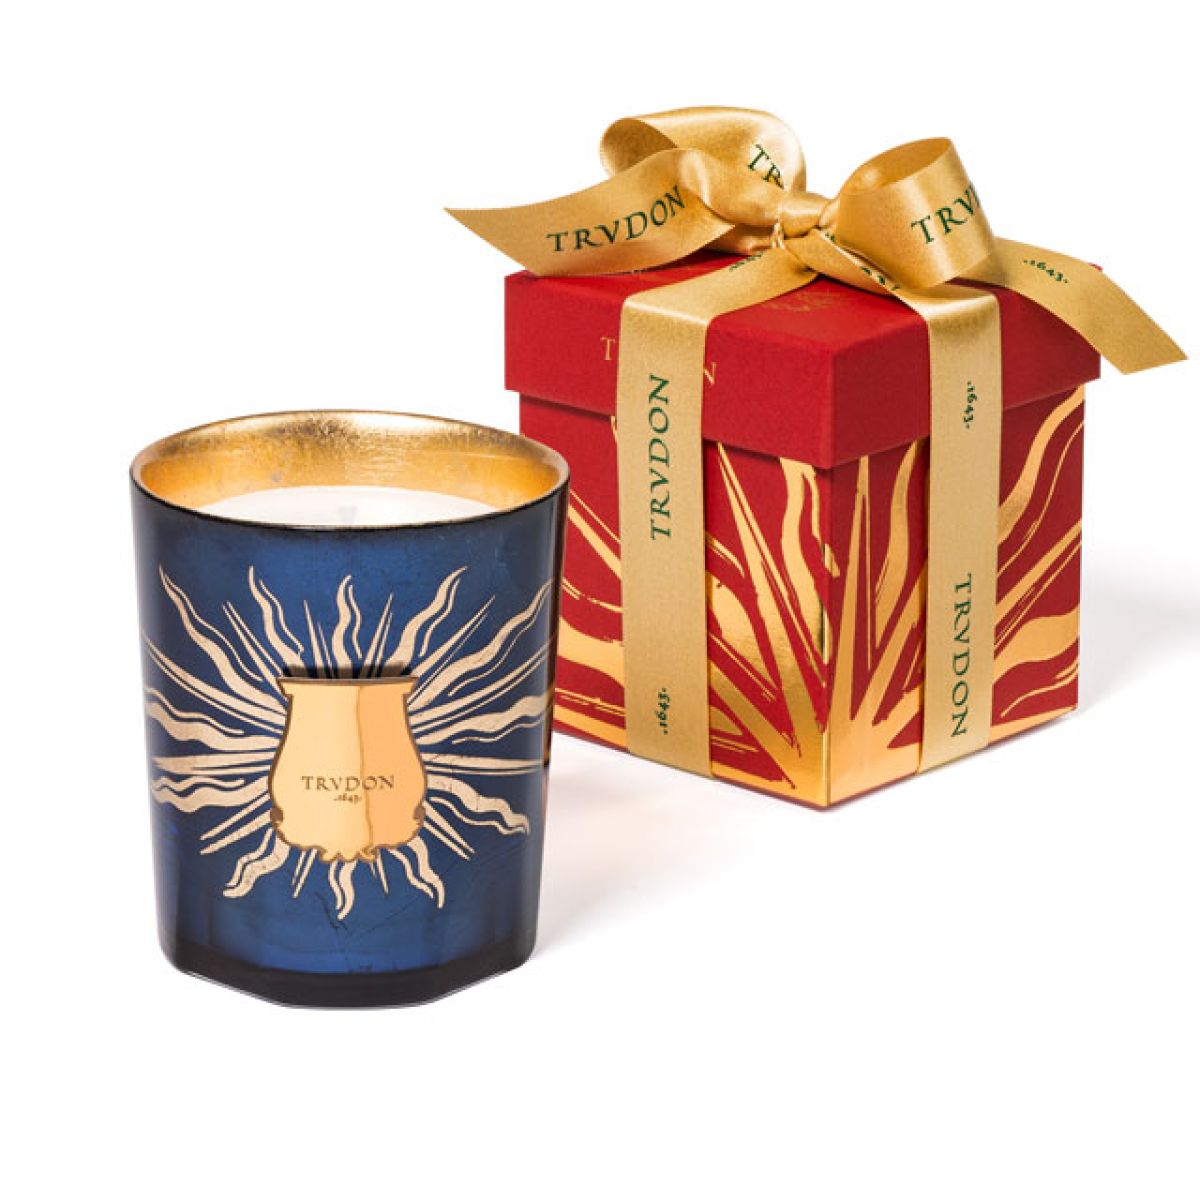 Trudon Astral Fir Holiday Candle